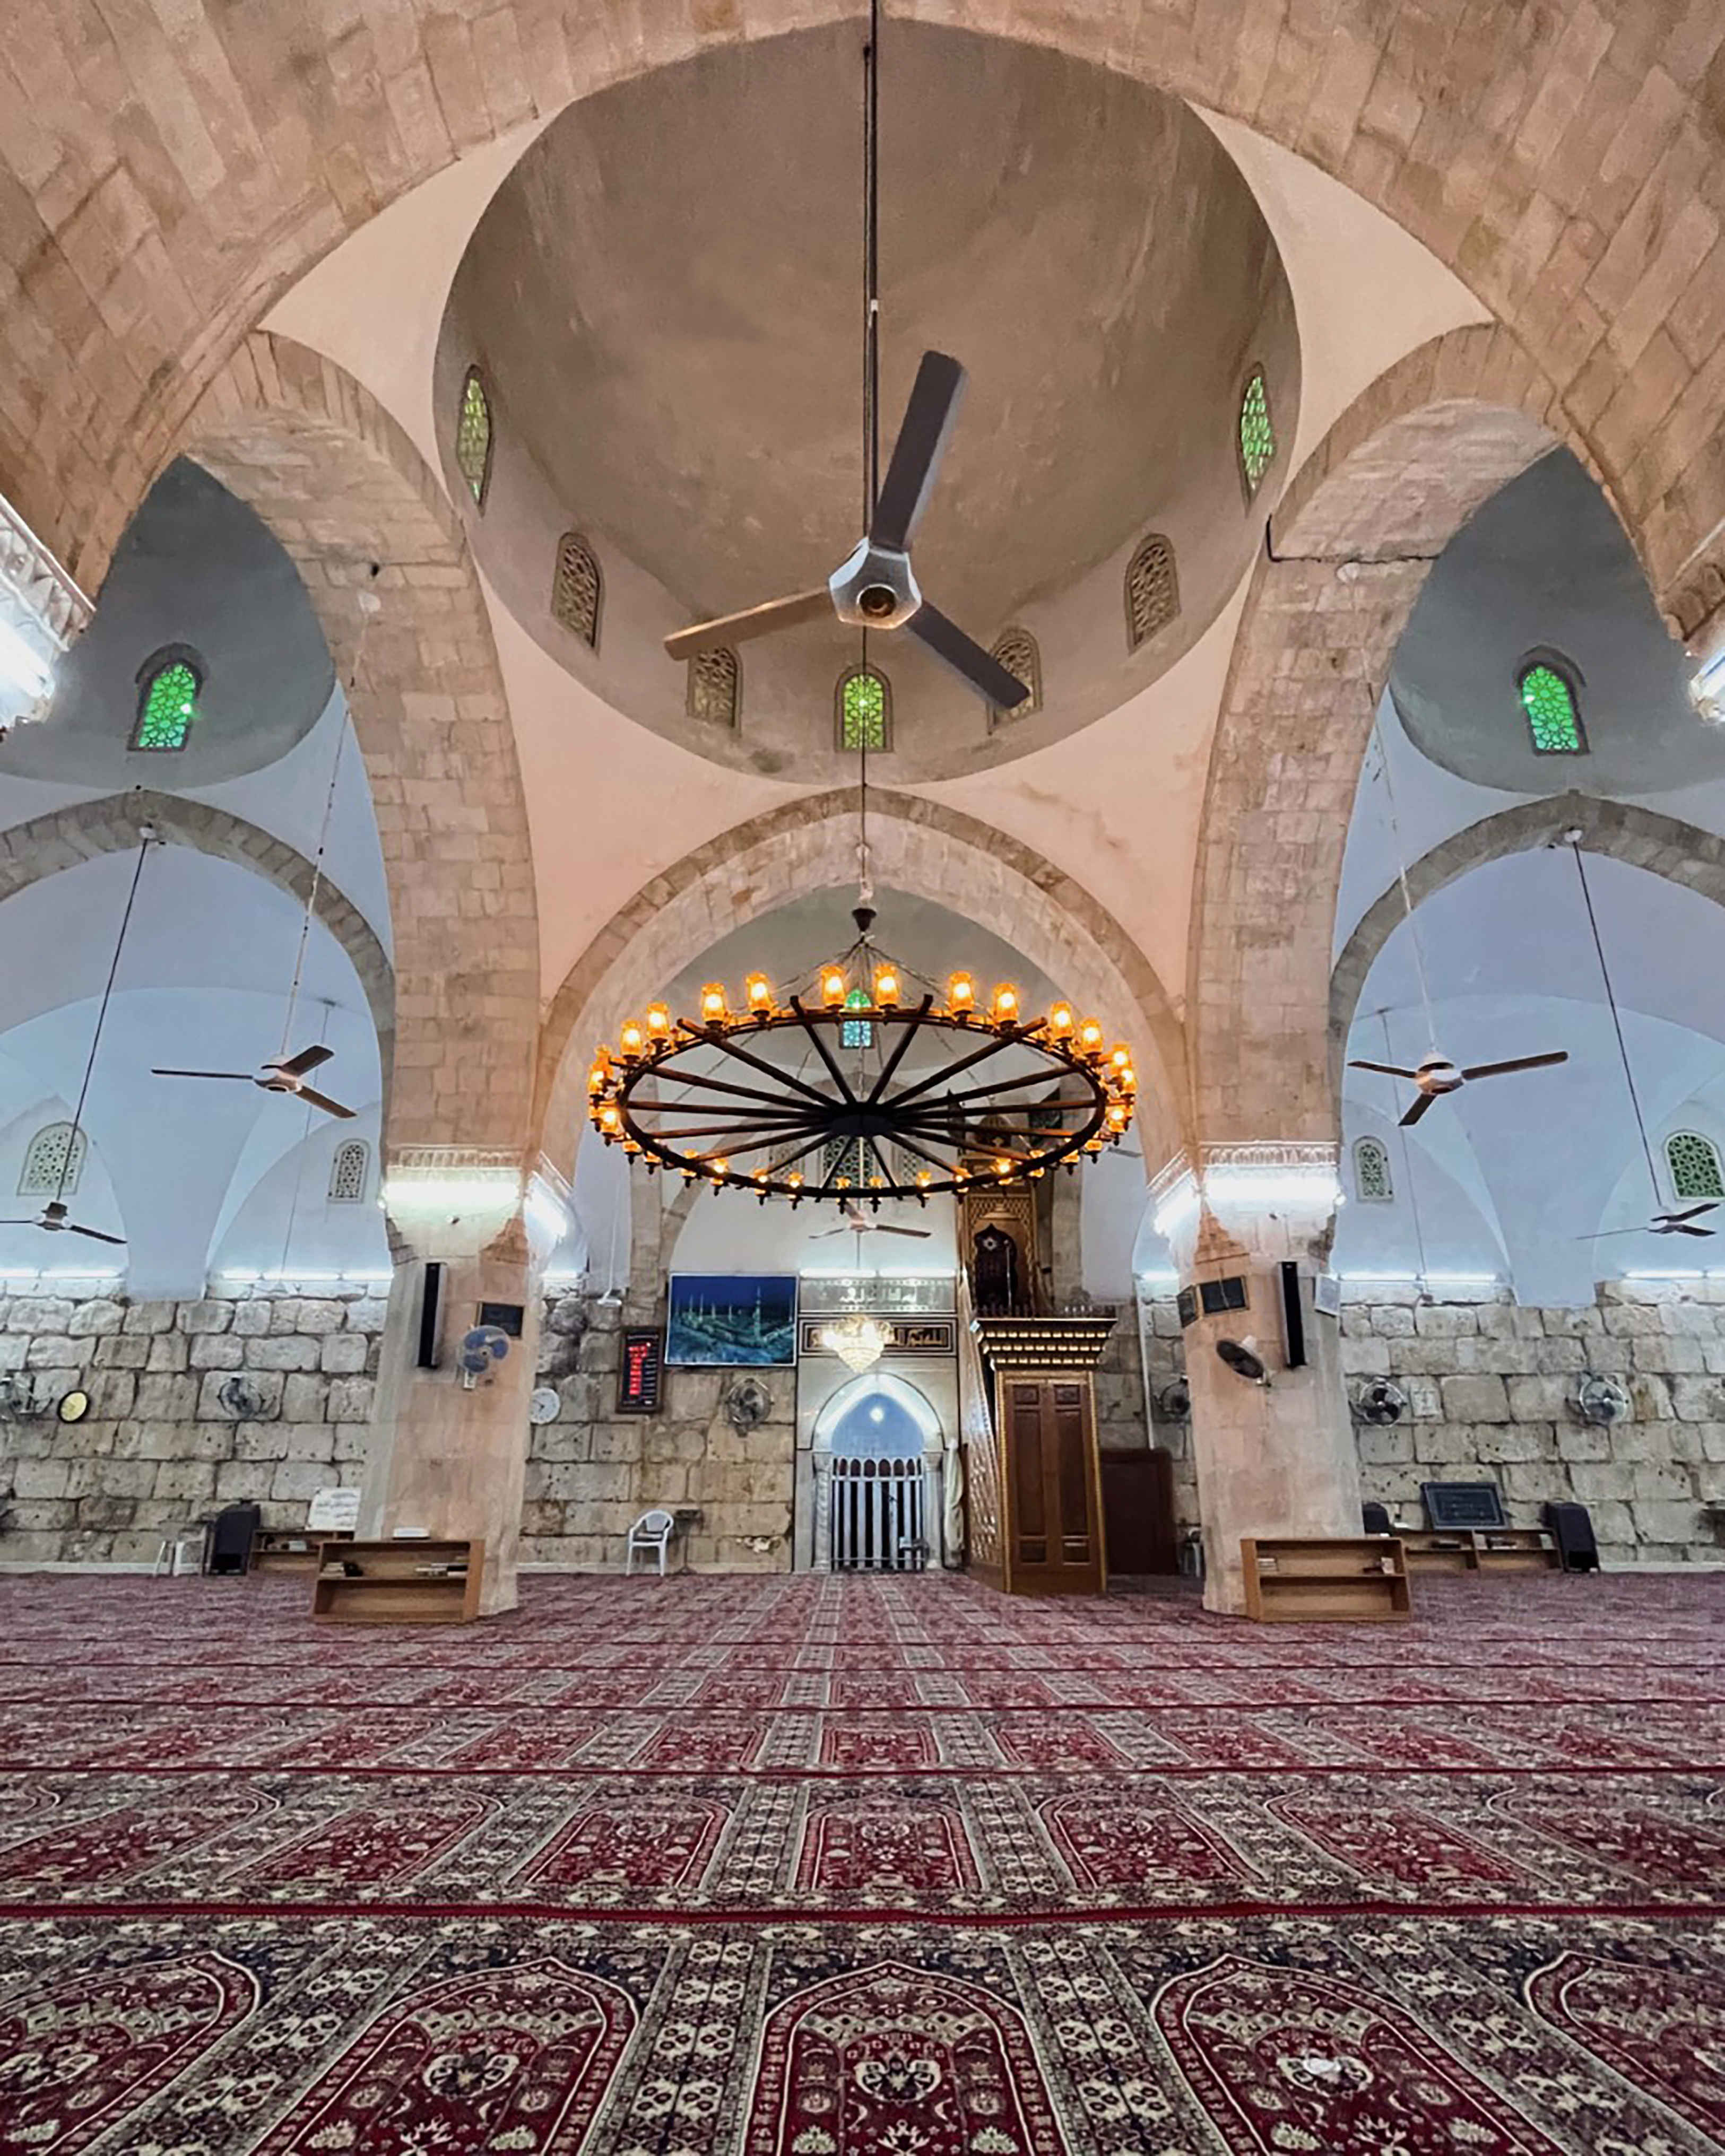 The interior of the main prayer-hall in the Upper Mosque in Hama. By: Ward Omaren, 2021.